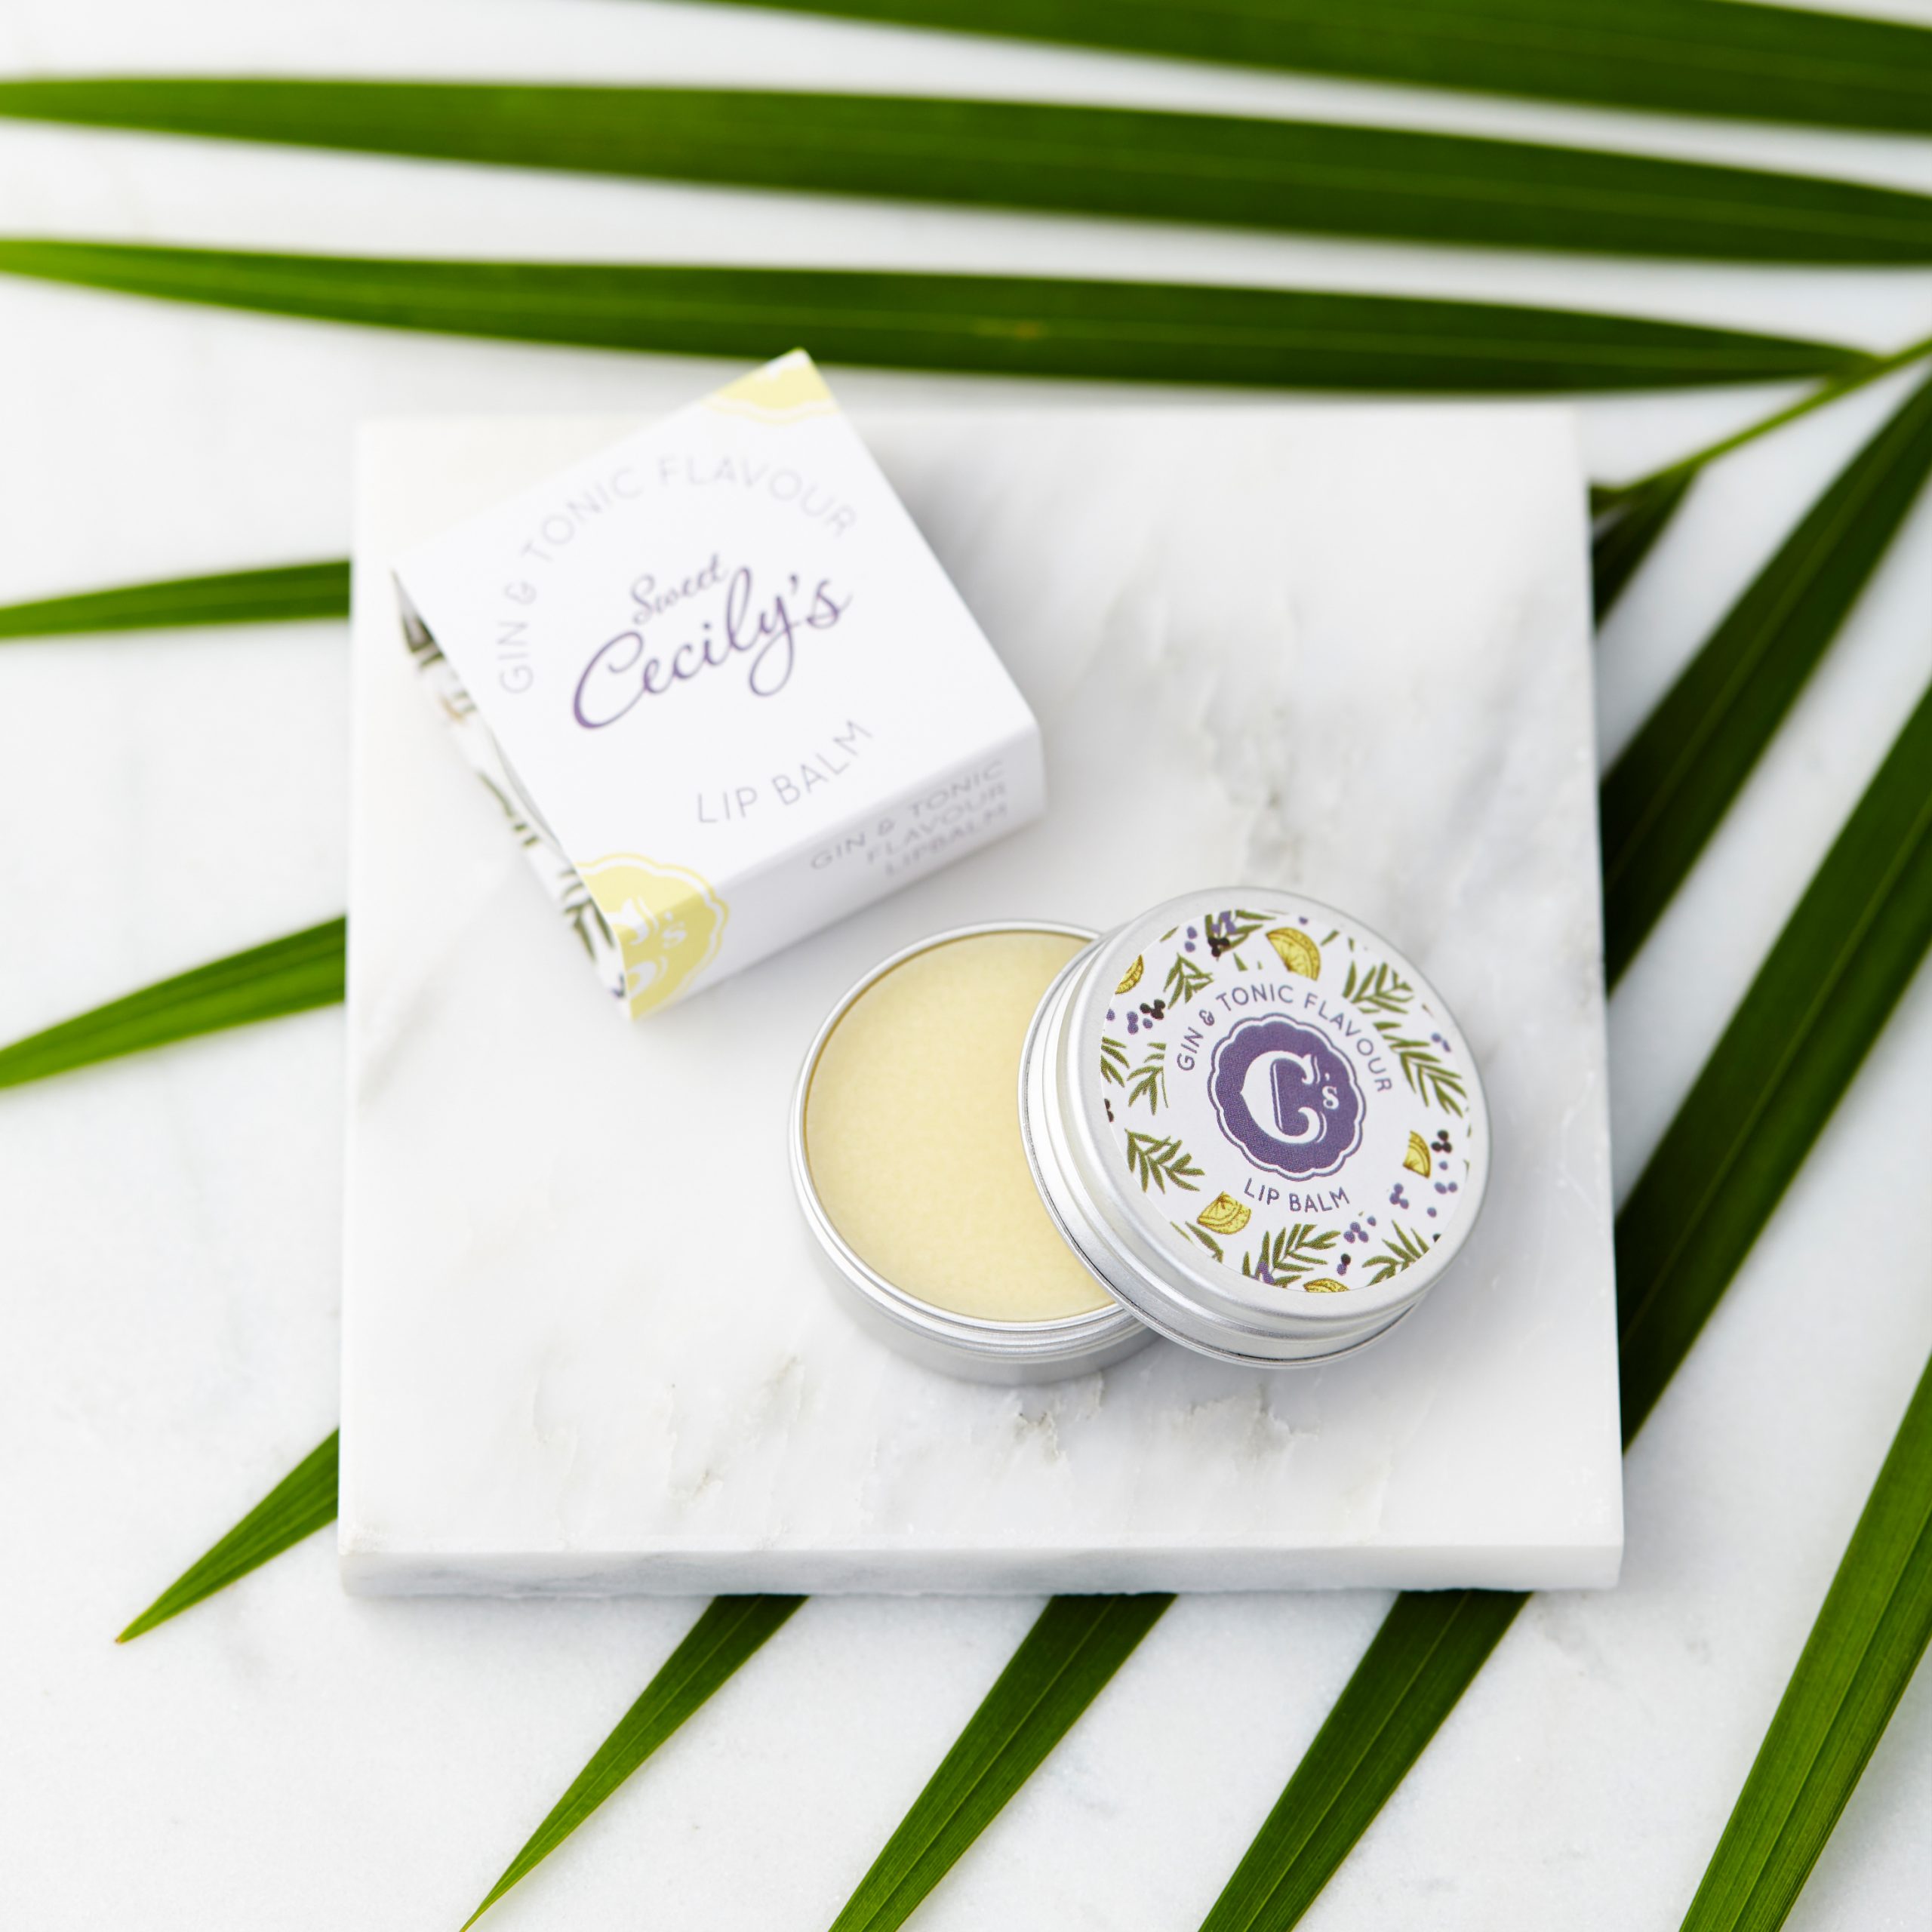 Sweet Cecily Gin and Tonic Flavour Lip Balm